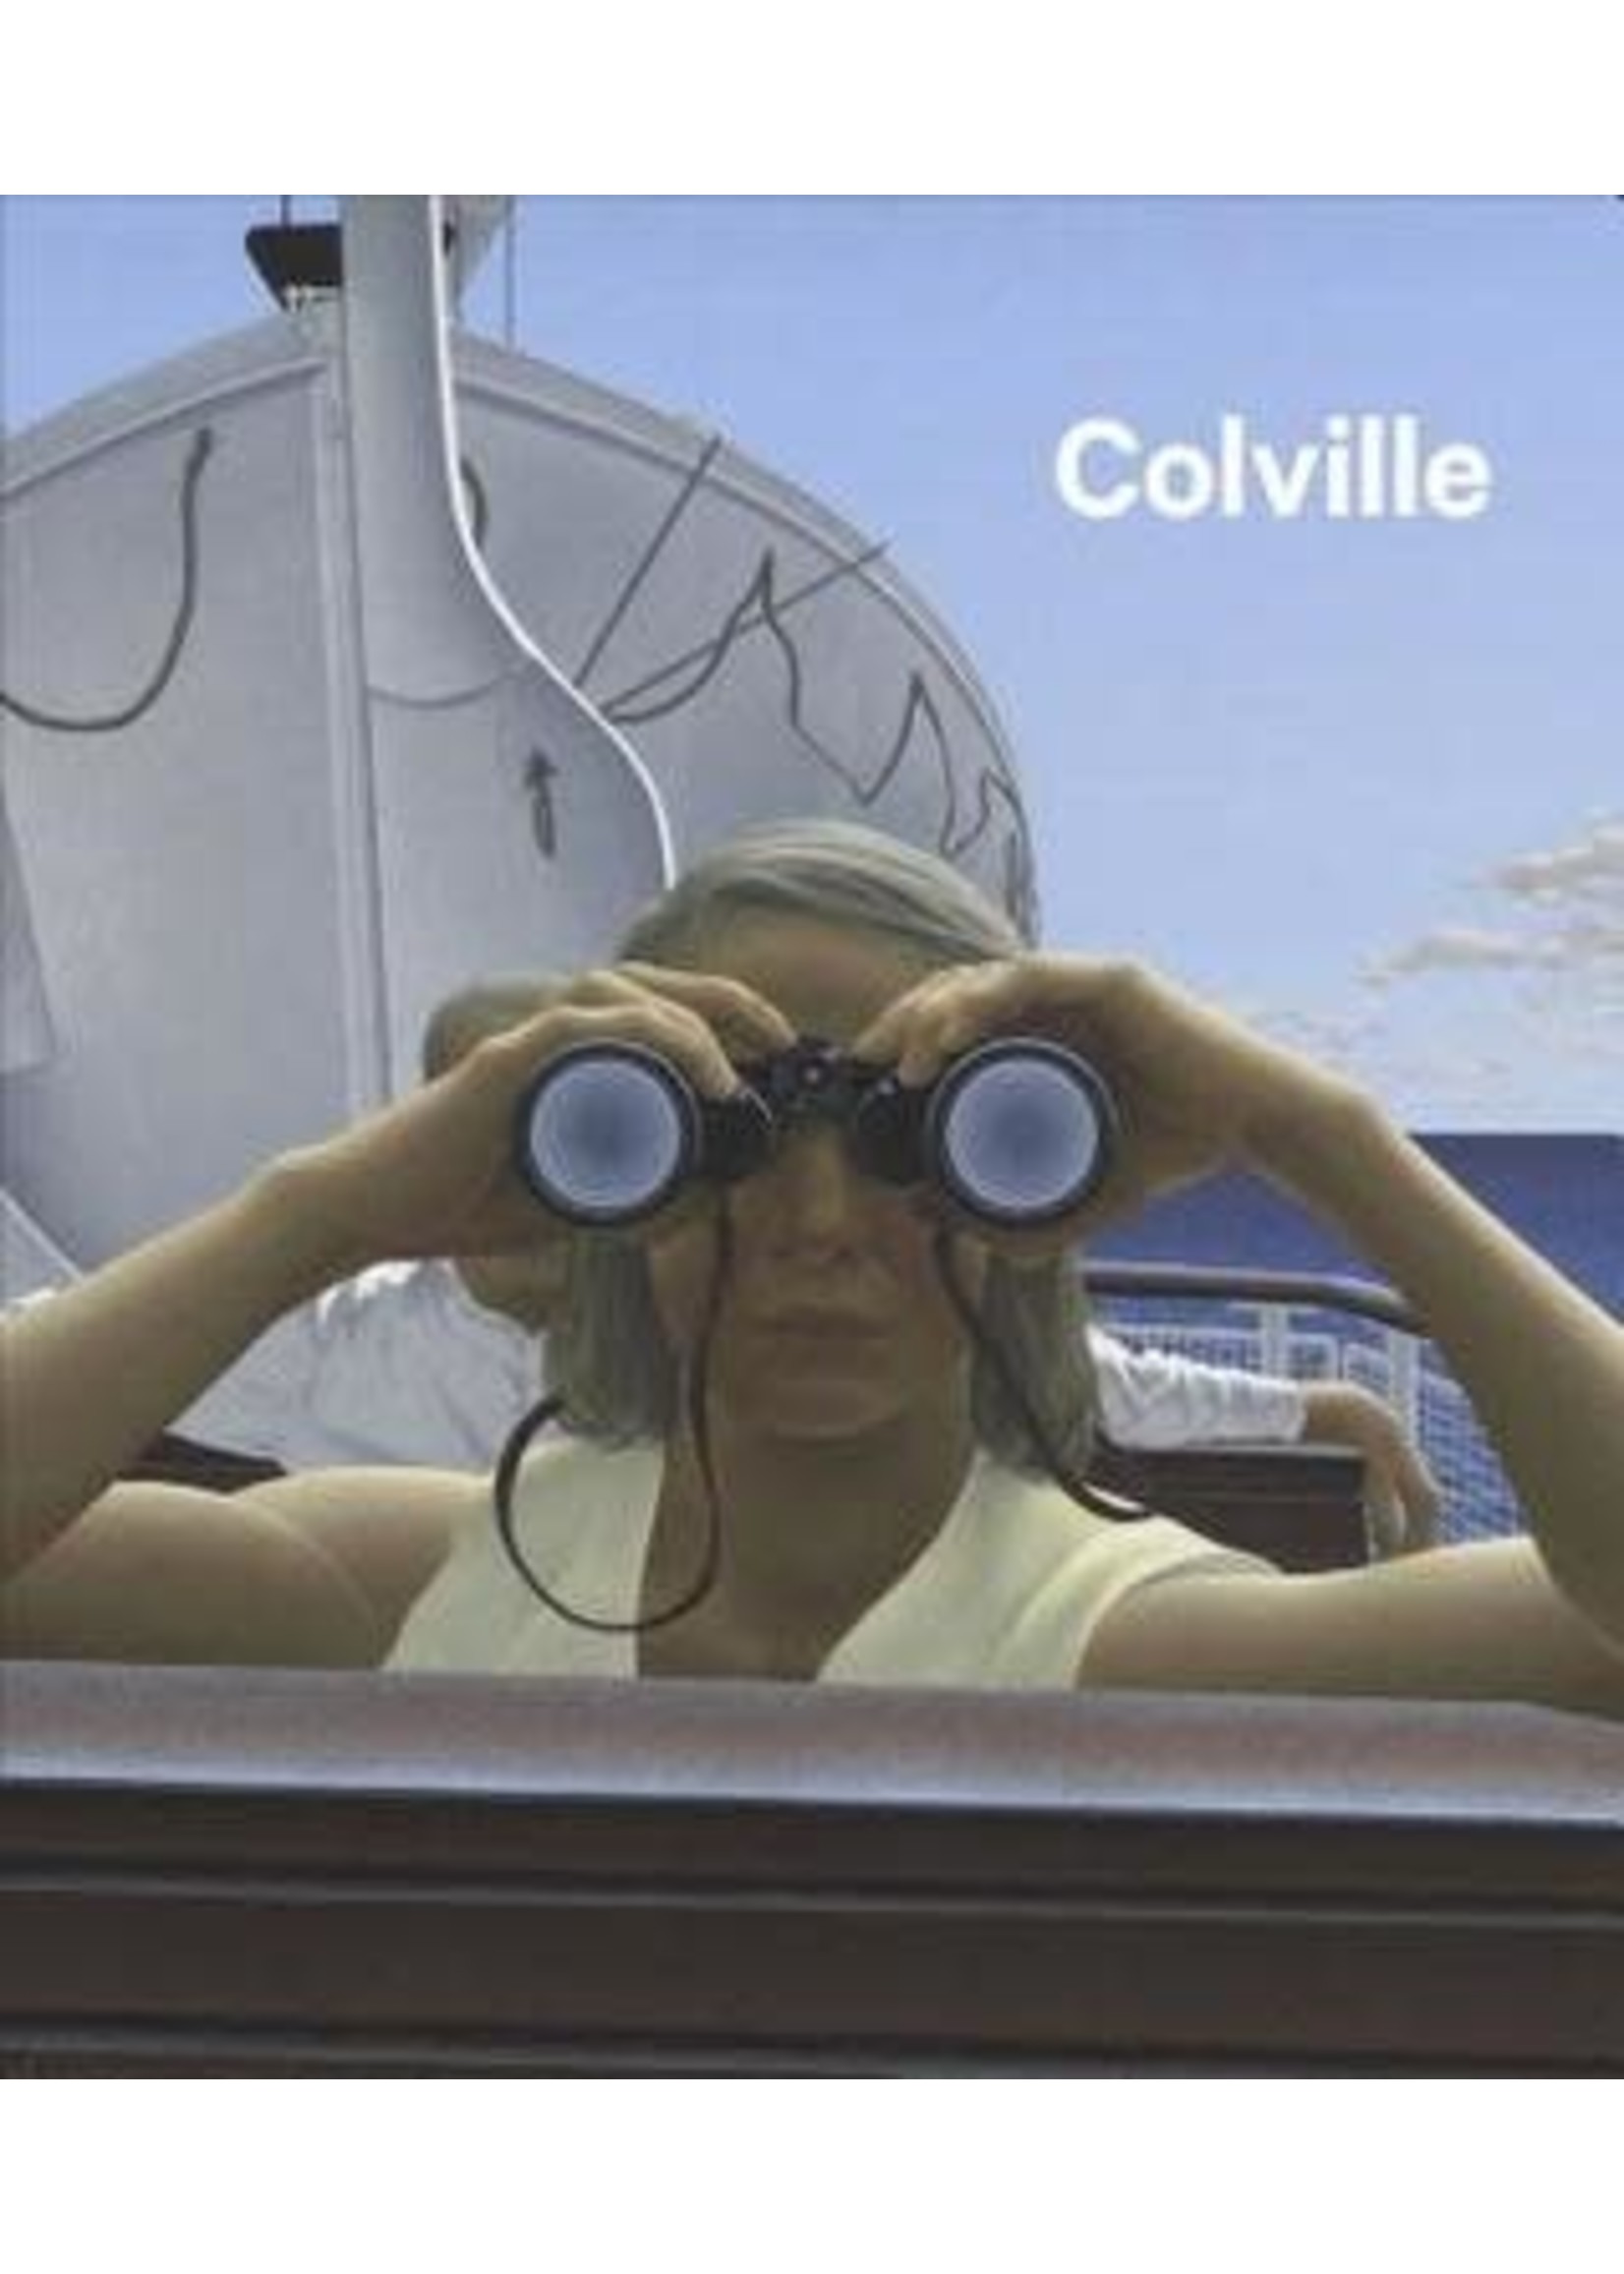 Colville by Andrew Hunter